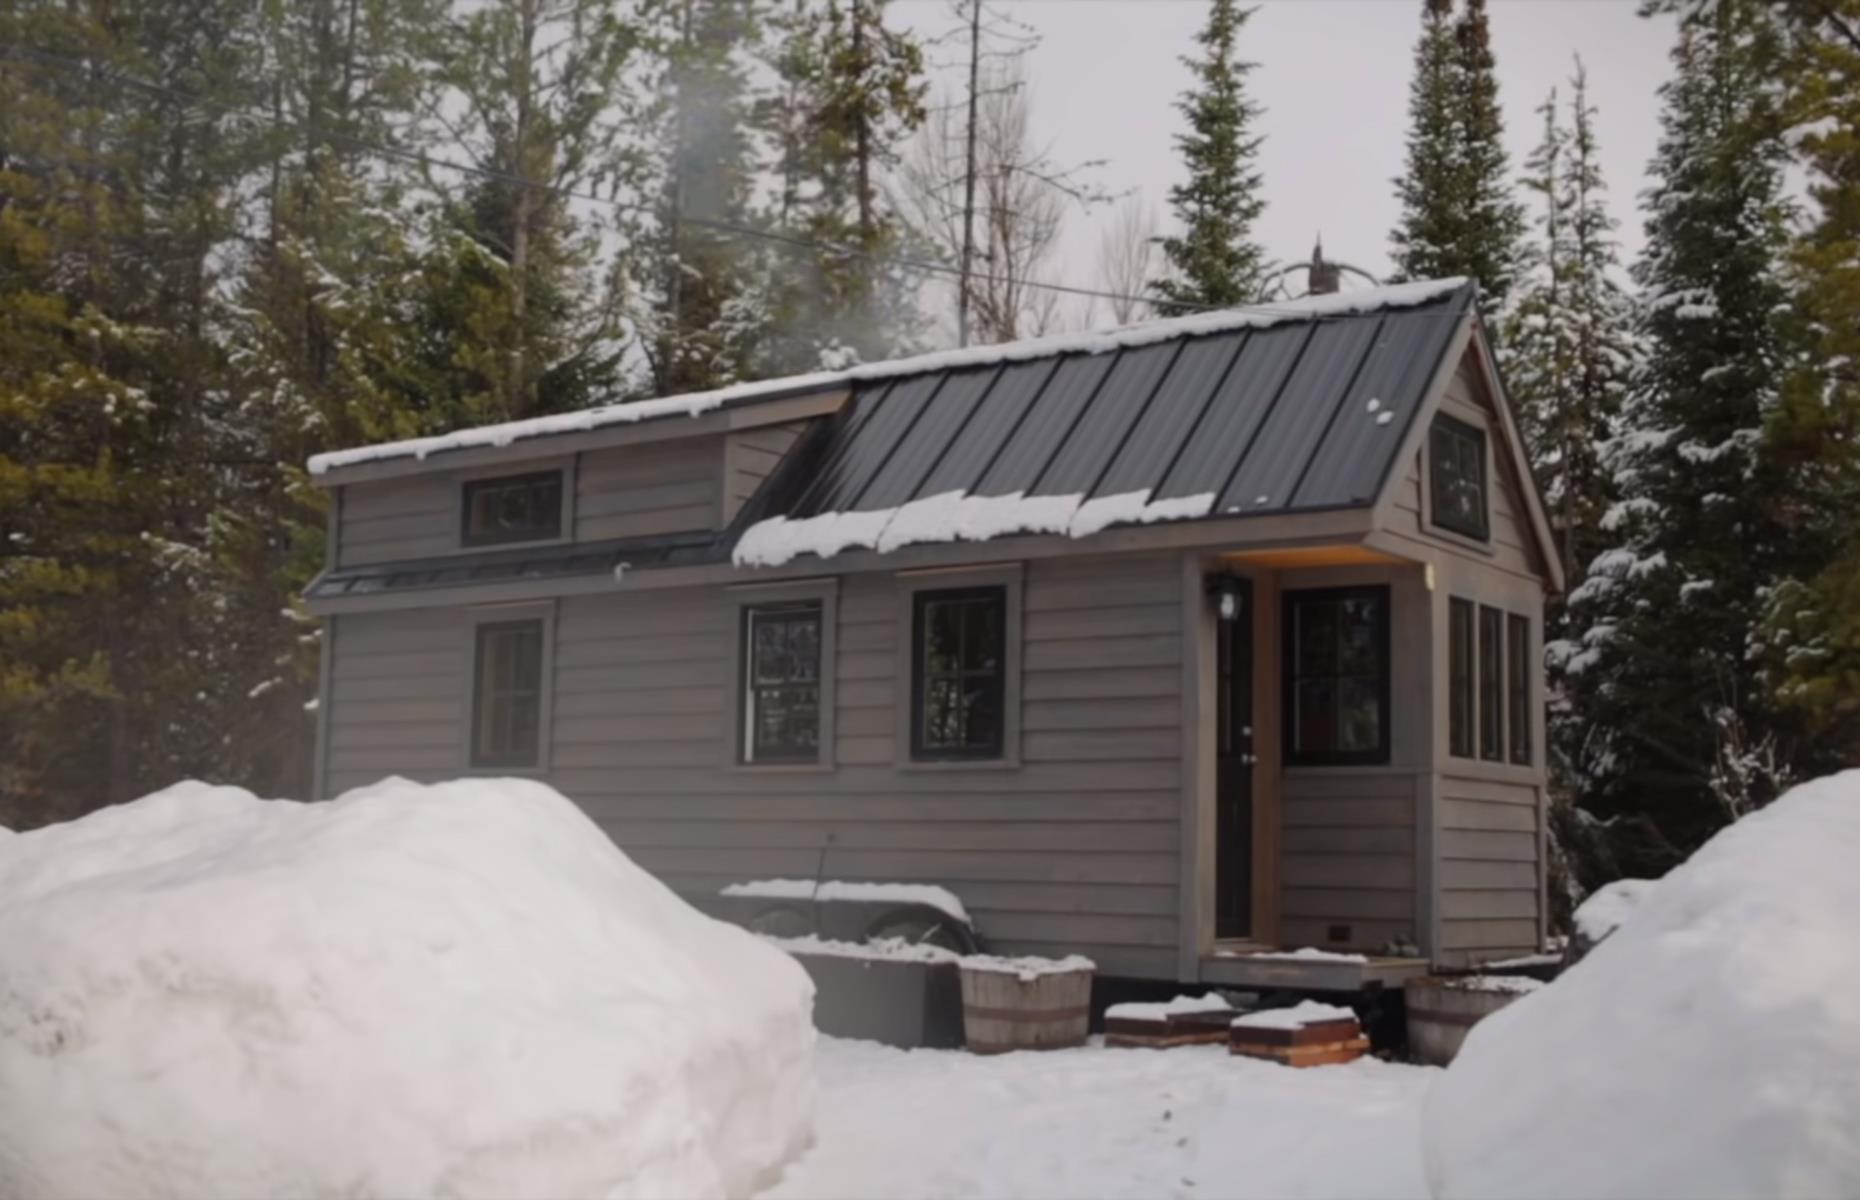 <p>This miniature cabin on wheels belongs to <a href="https://fynyth.blogspot.com/">Ariel McGlothin </a>and is nestled way up in the Wyoming mountains. She shared her minimalist off-grid lifestyle in a <a href="https://www.youtube.com/watch?v=84mKsMtb_bQ">video tour</a> with filmmakers from <a href="https://www.tinyhouseexpedition.com/">Tiny House Expedition</a>.</p>